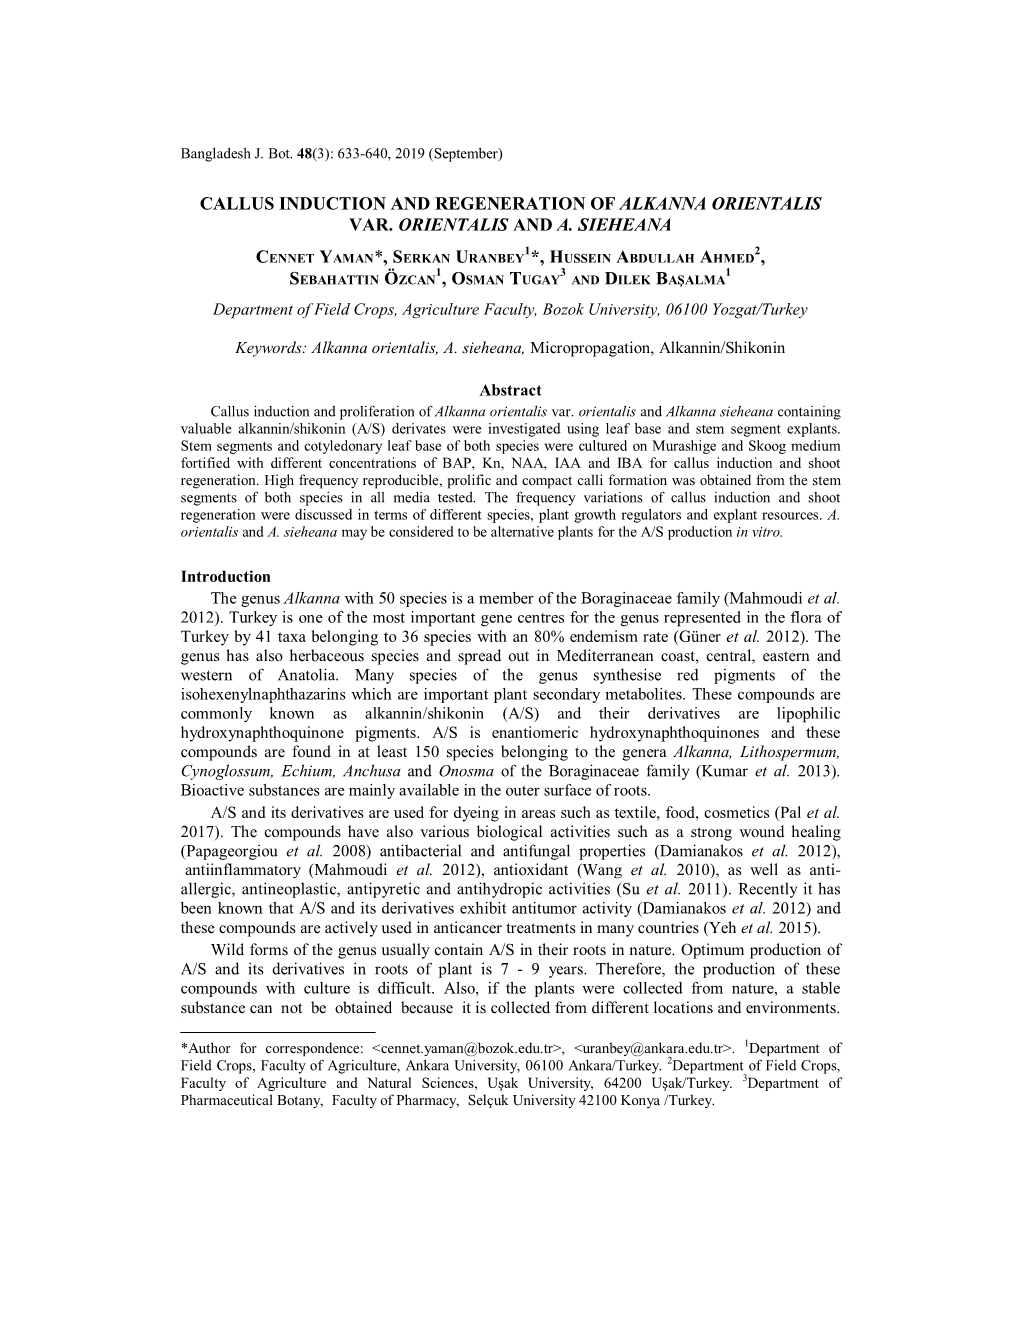 Callus Induction and Regeneration of Alkanna Orientalis Var. Orientalis and A